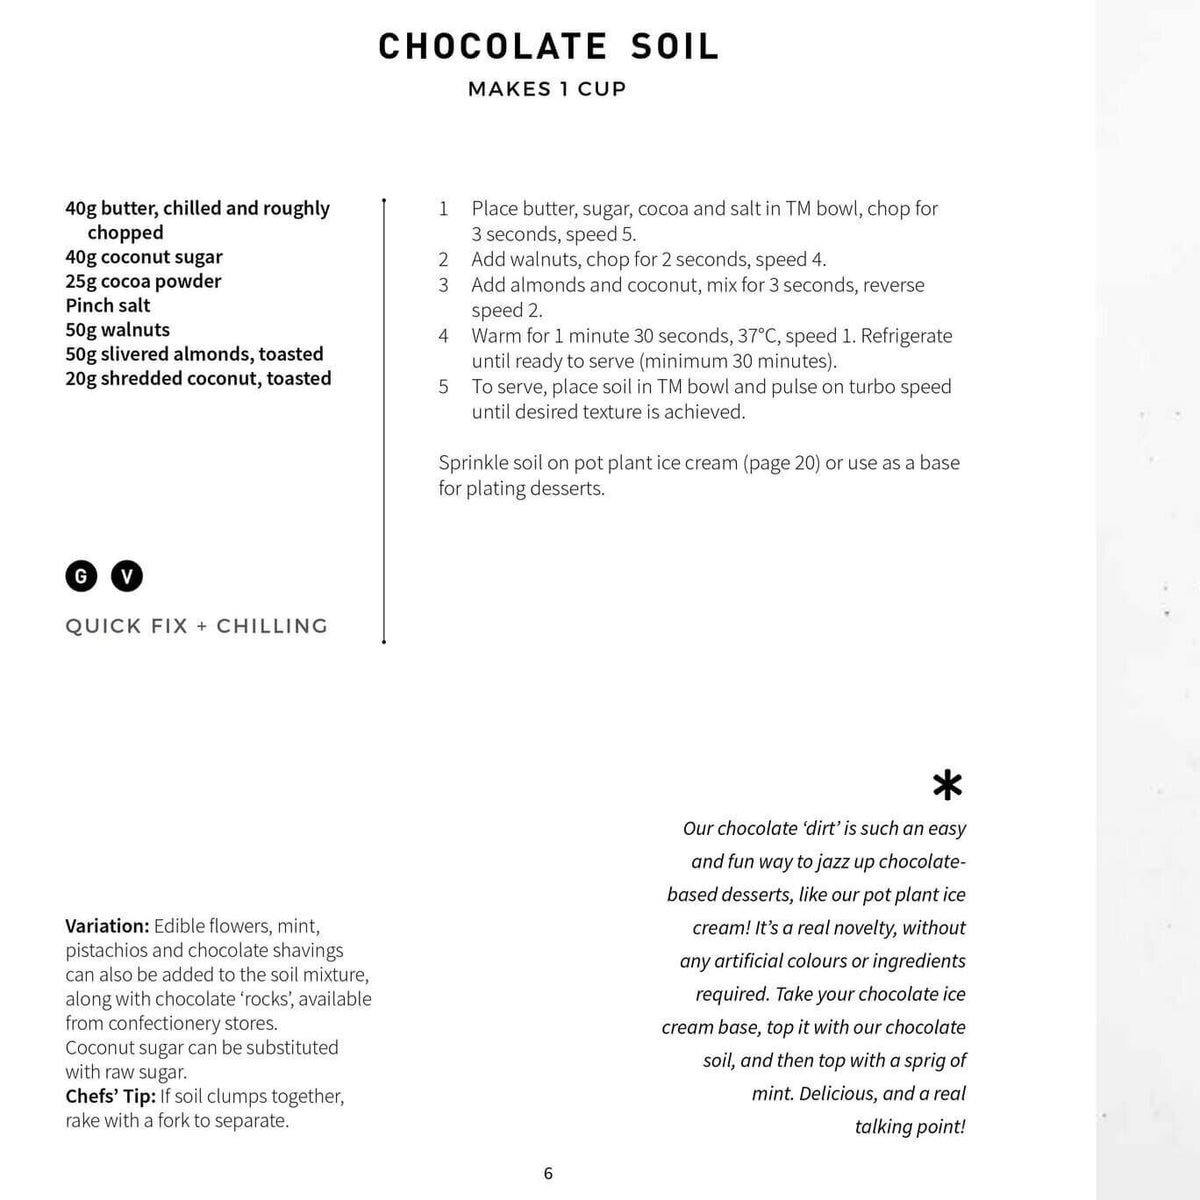 Desserts Class Booklet for Thermomix Machines | Digital Cookbook